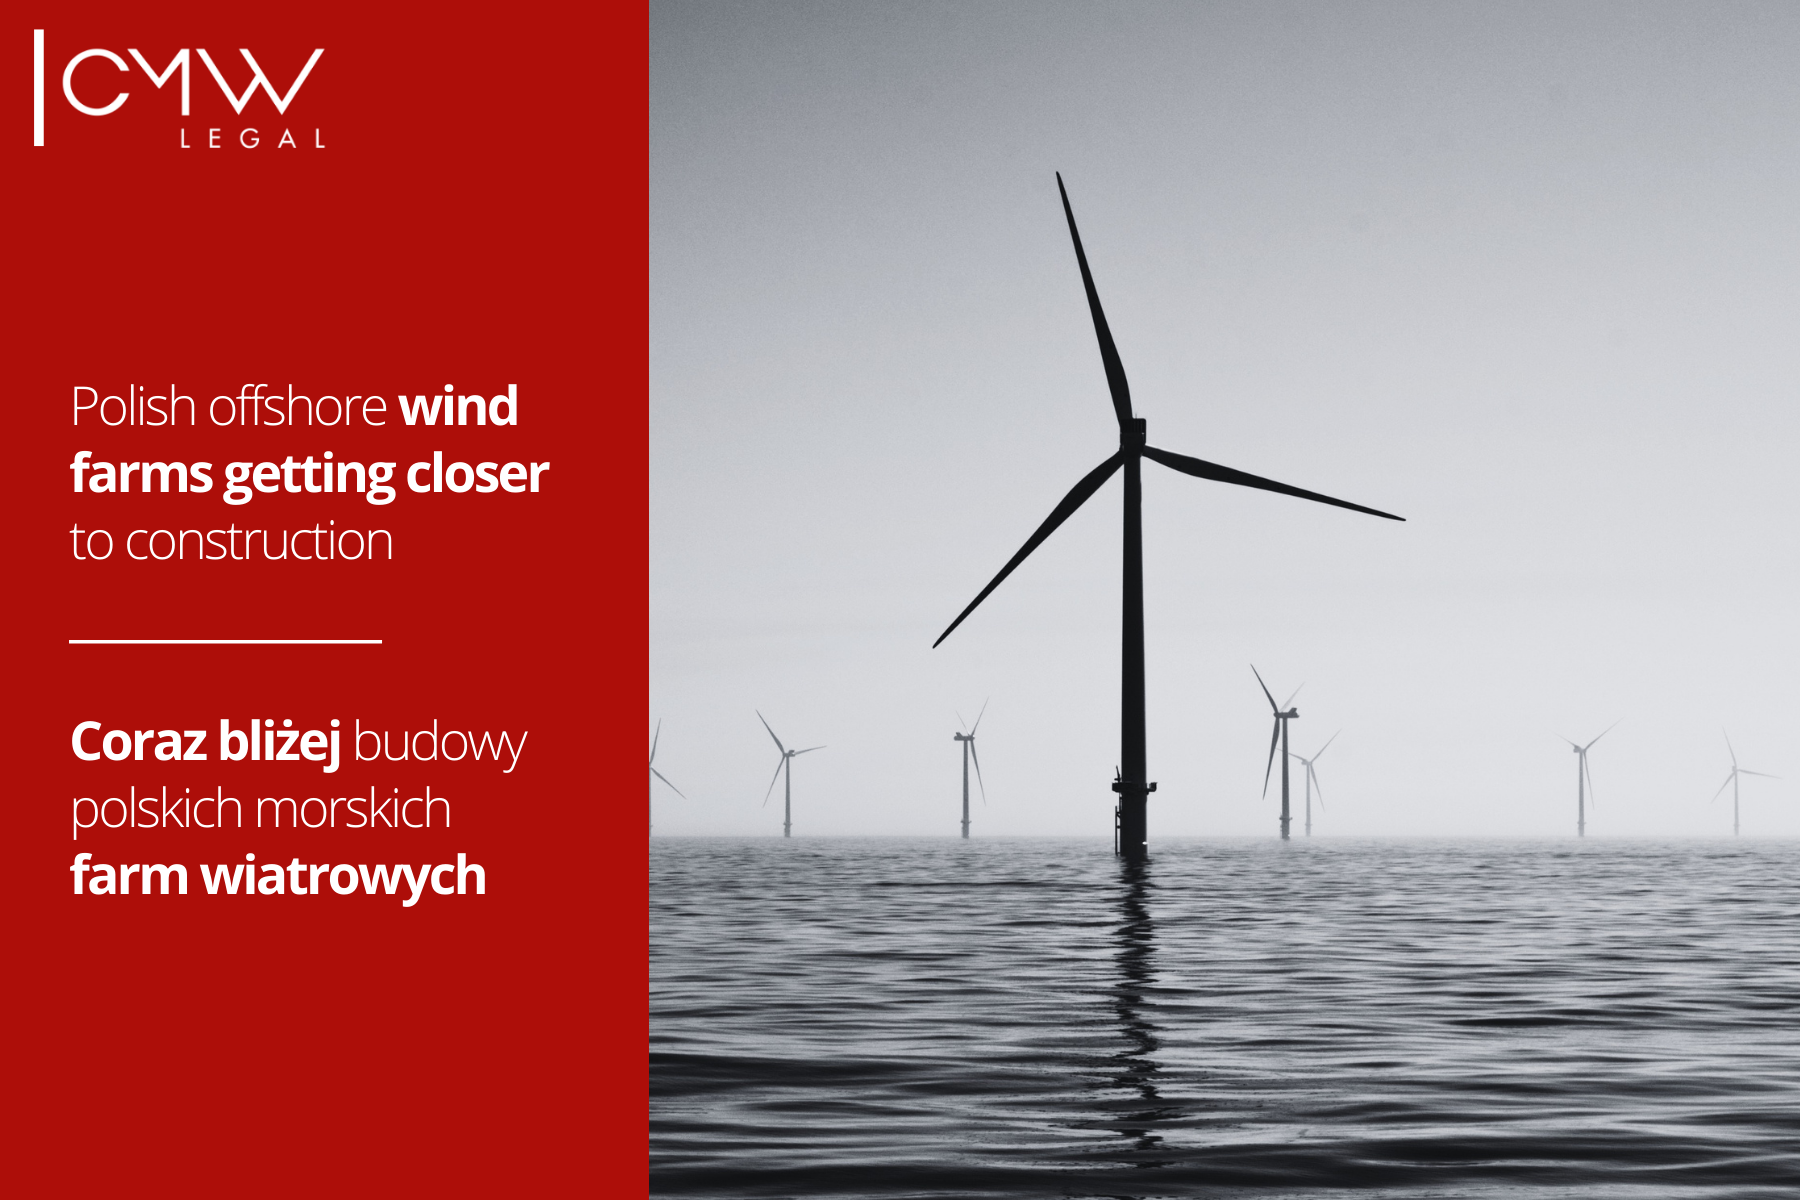  Legal foundation for the construction of Polish offshore wind farms